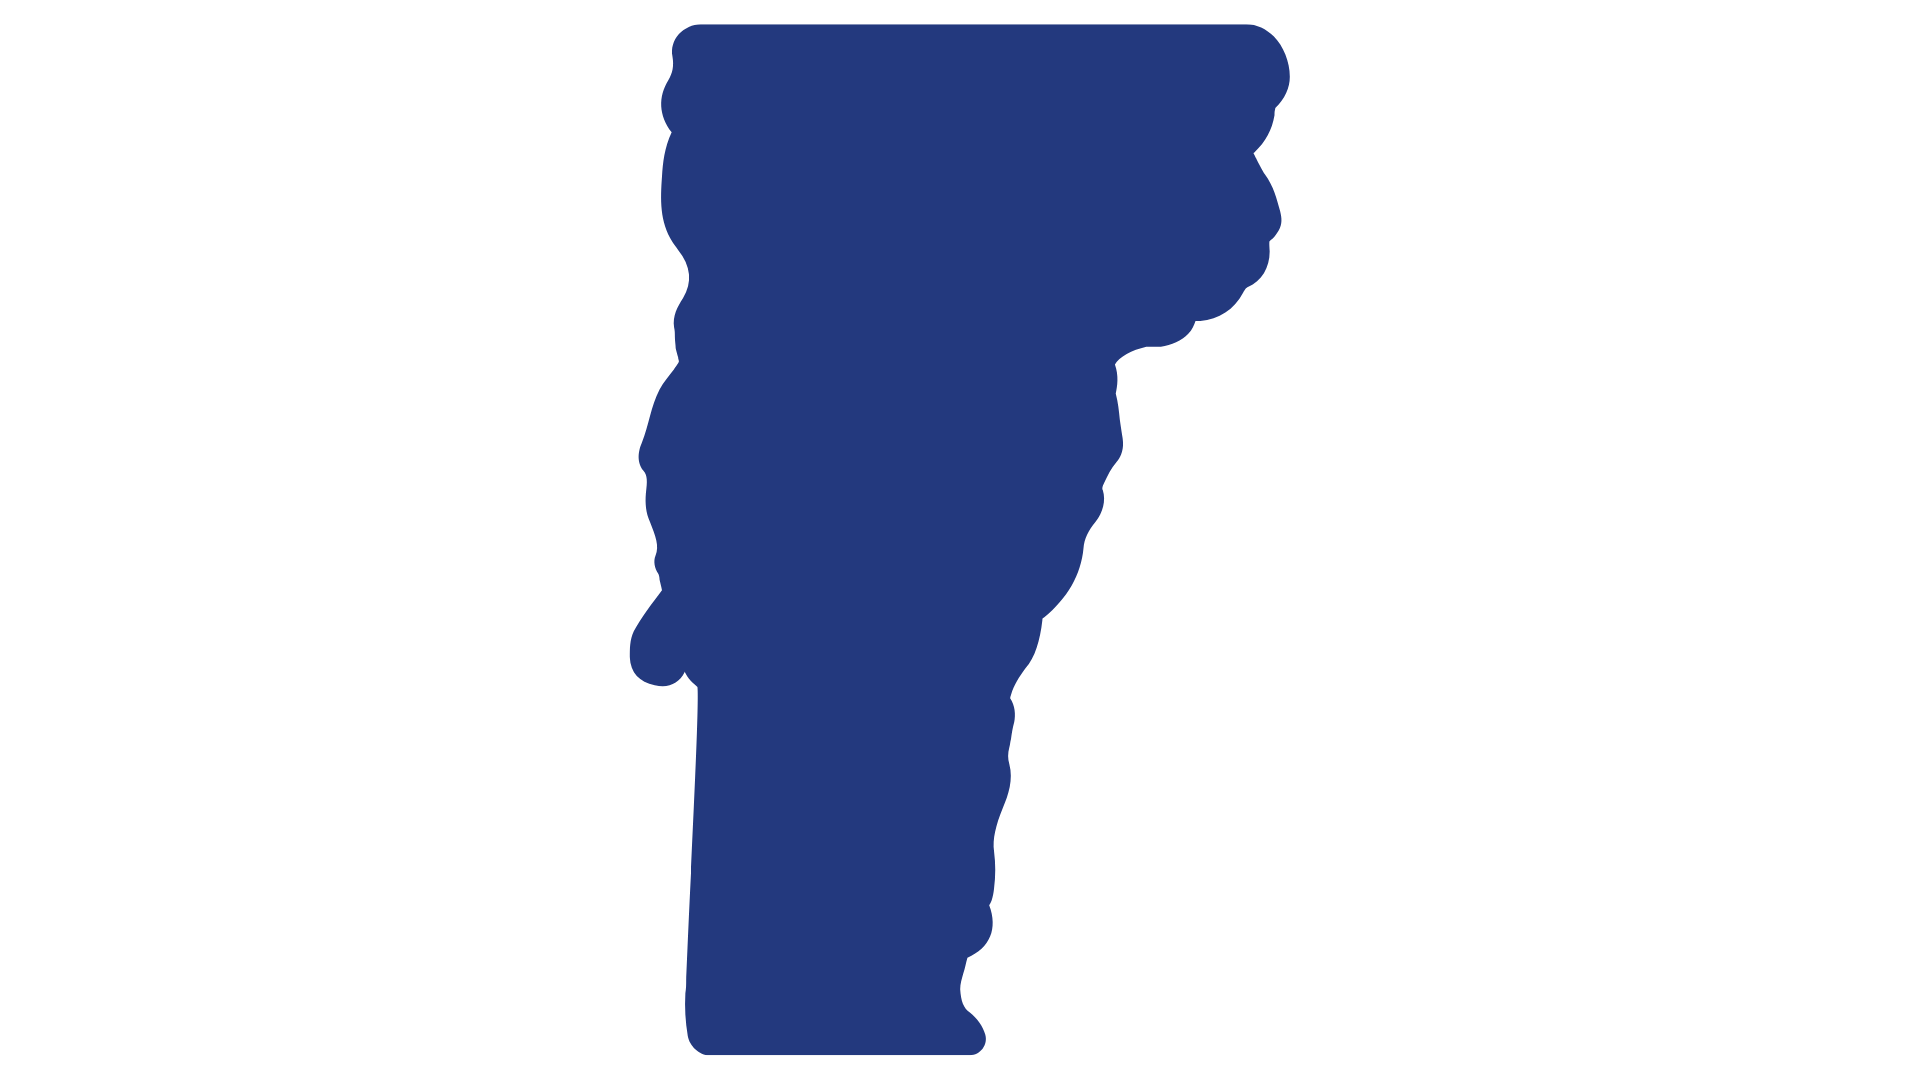 blue graphic of the state of Vermont